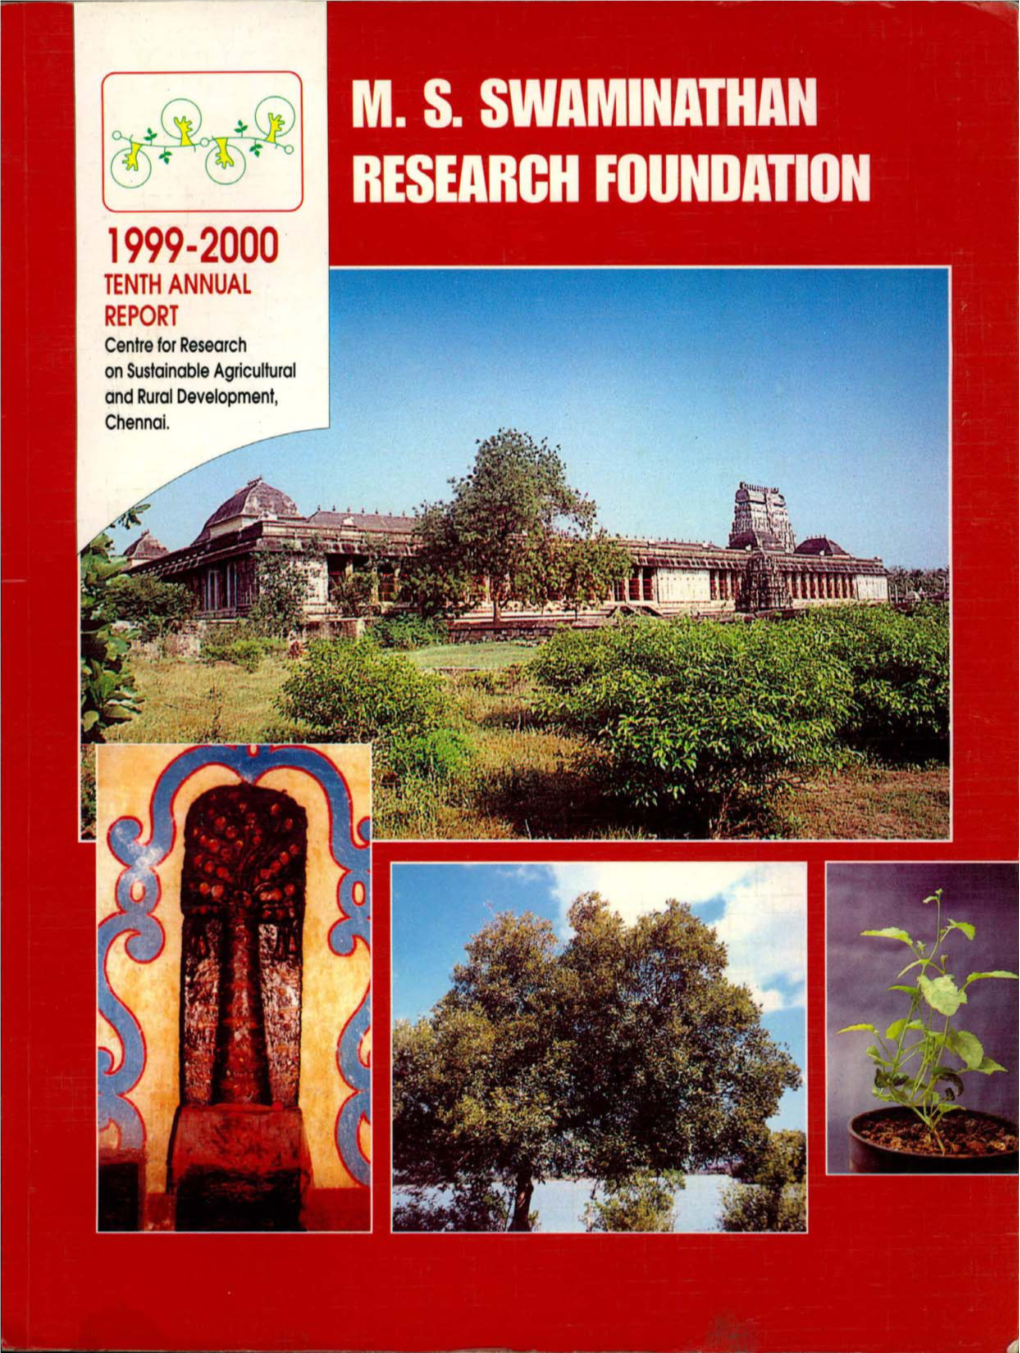 Tenth Annual Report 1999 - 2000